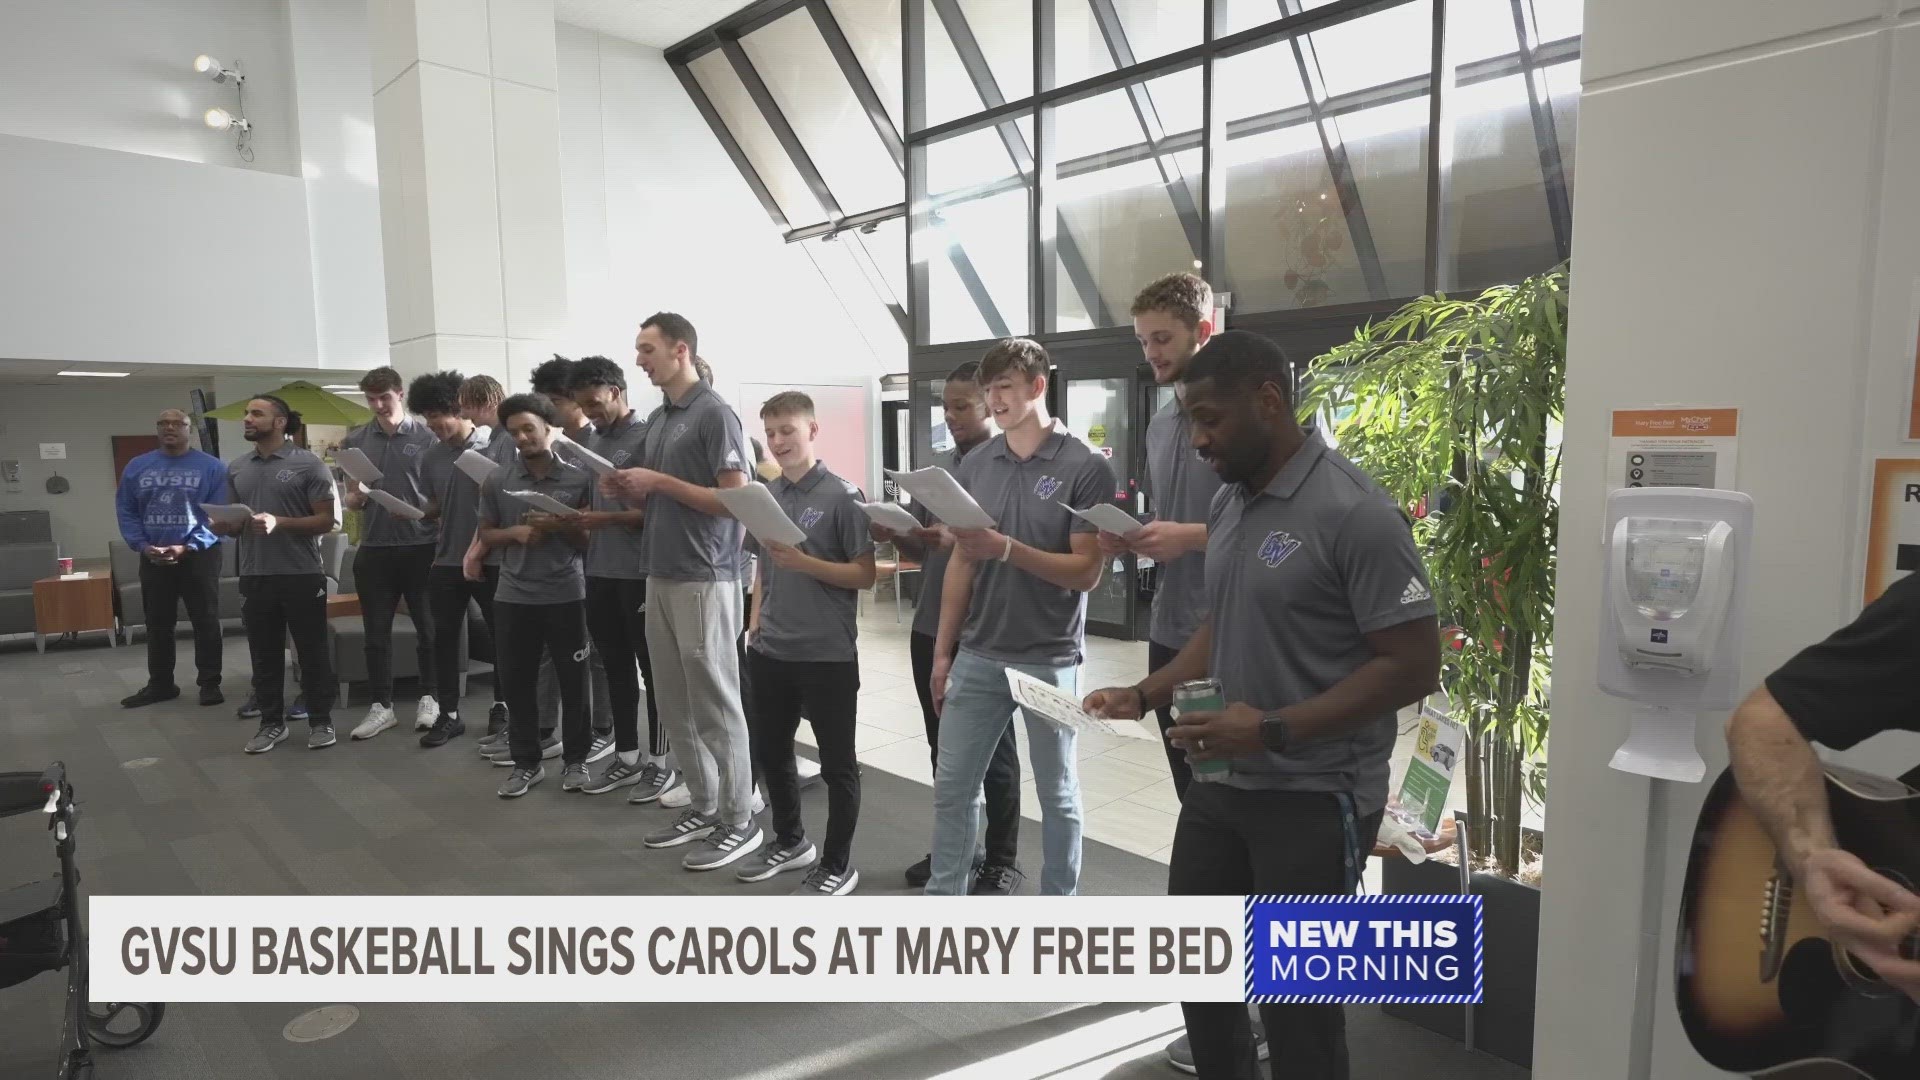 Friday, 15 players and coaches from the Grand Valley State University Men’s Basketball Team visited Mary Free Bed to sing carols for patients and staff.